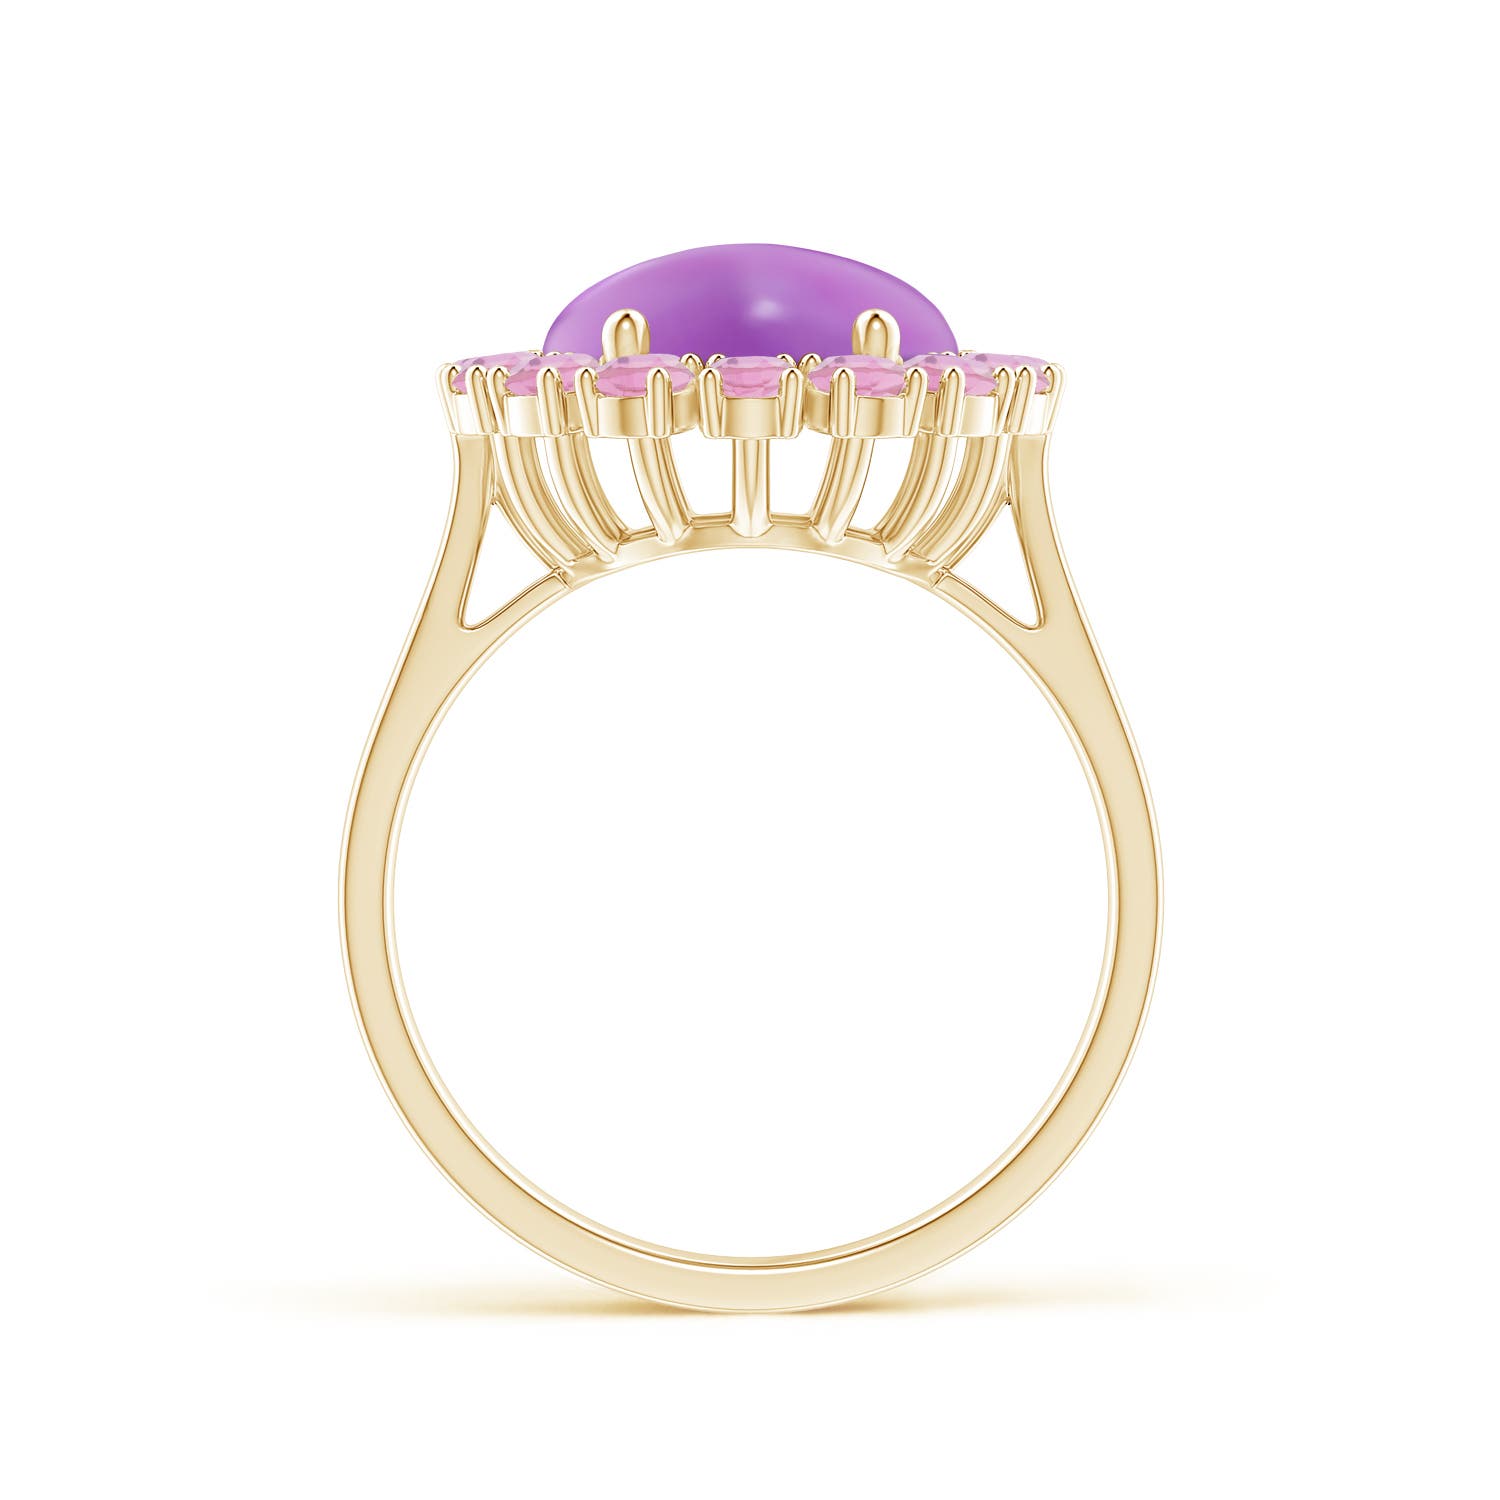 A - Amethyst / 7.26 CT / 14 KT Yellow Gold